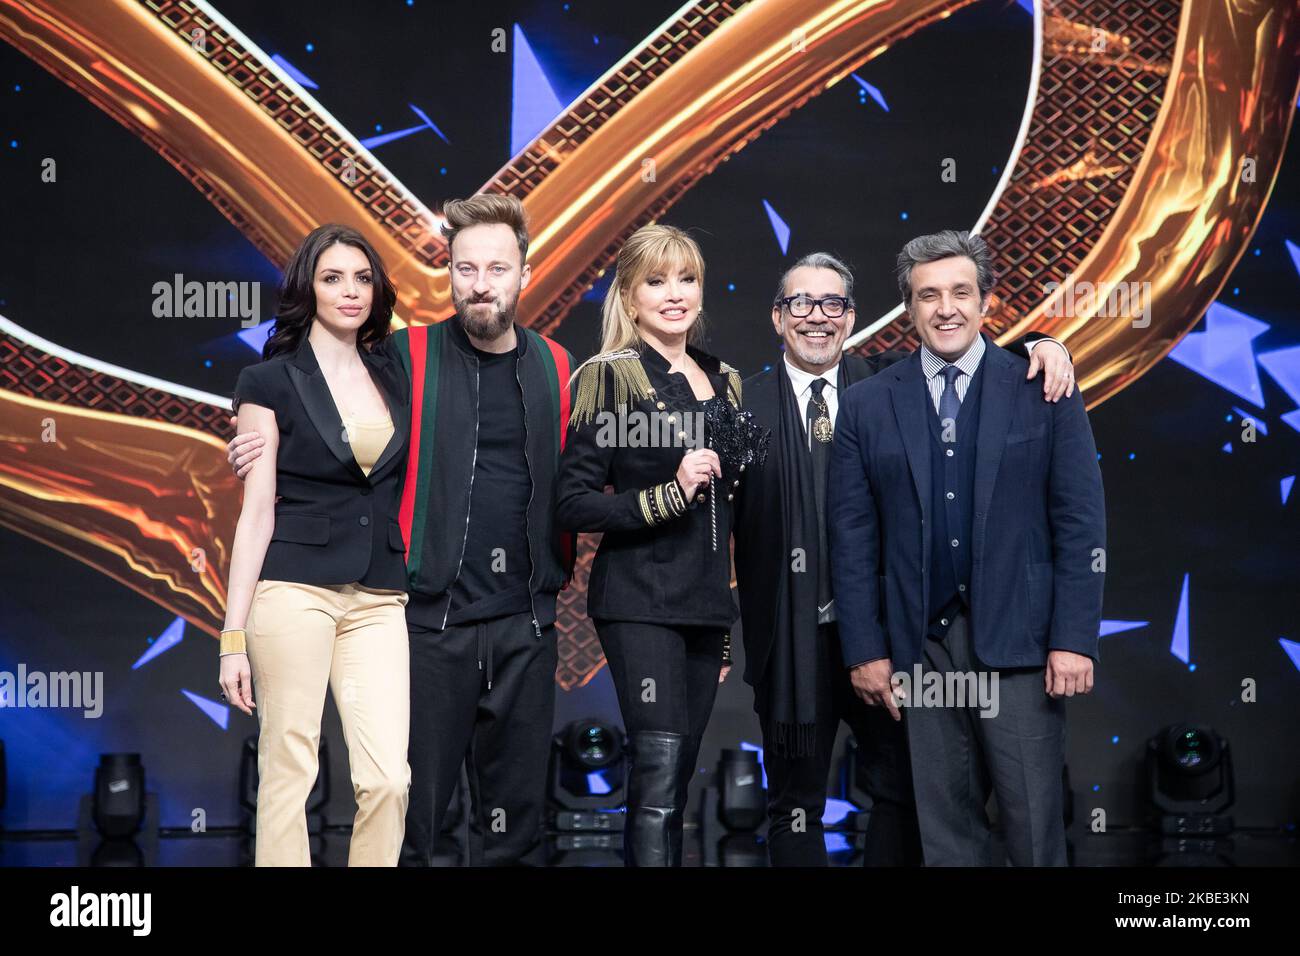 Milly Carlucci, Ilenia Pastorelli, Francesco Facchinetti, Guillermo Mariotto, Flavio Insinna attends the presentation of the new television show 'The masked singer', in Milan, Italy, on January 8, 2020. (Photo by Mauro Fagiani/NurPhoto) Stock Photo